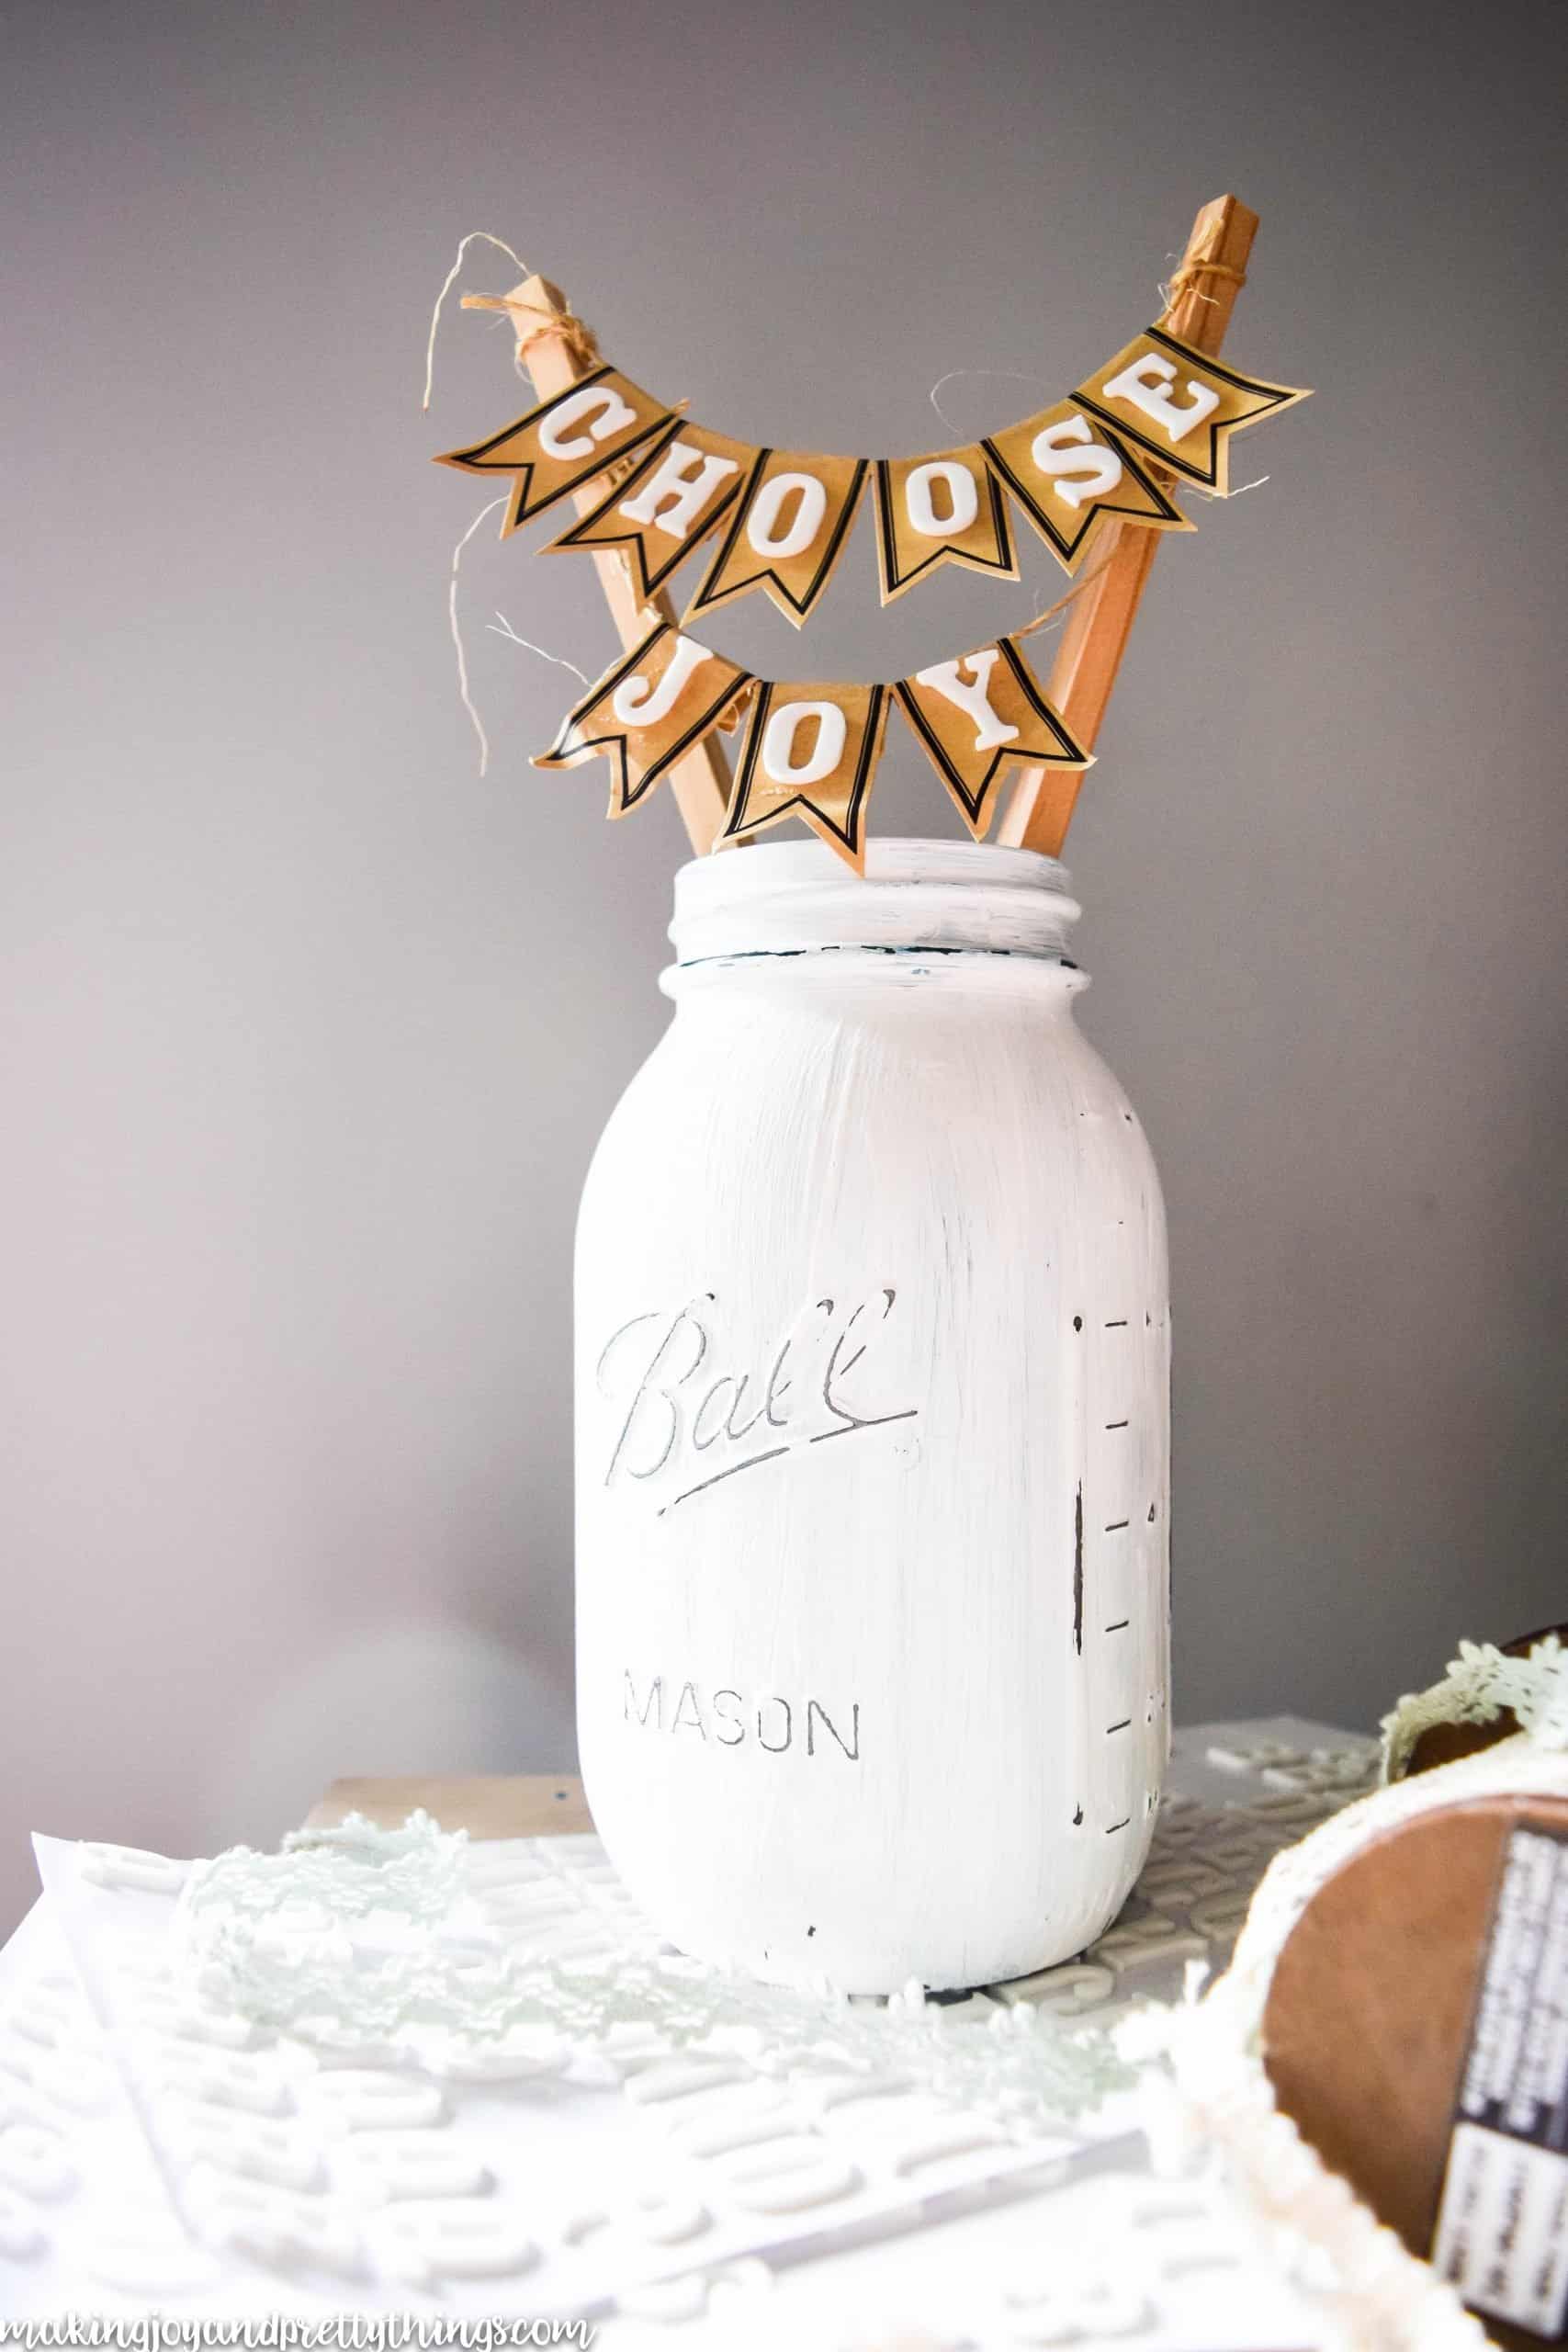 Follow along with this easy mason jar display tutorial and give this uplifting decor as a gift 